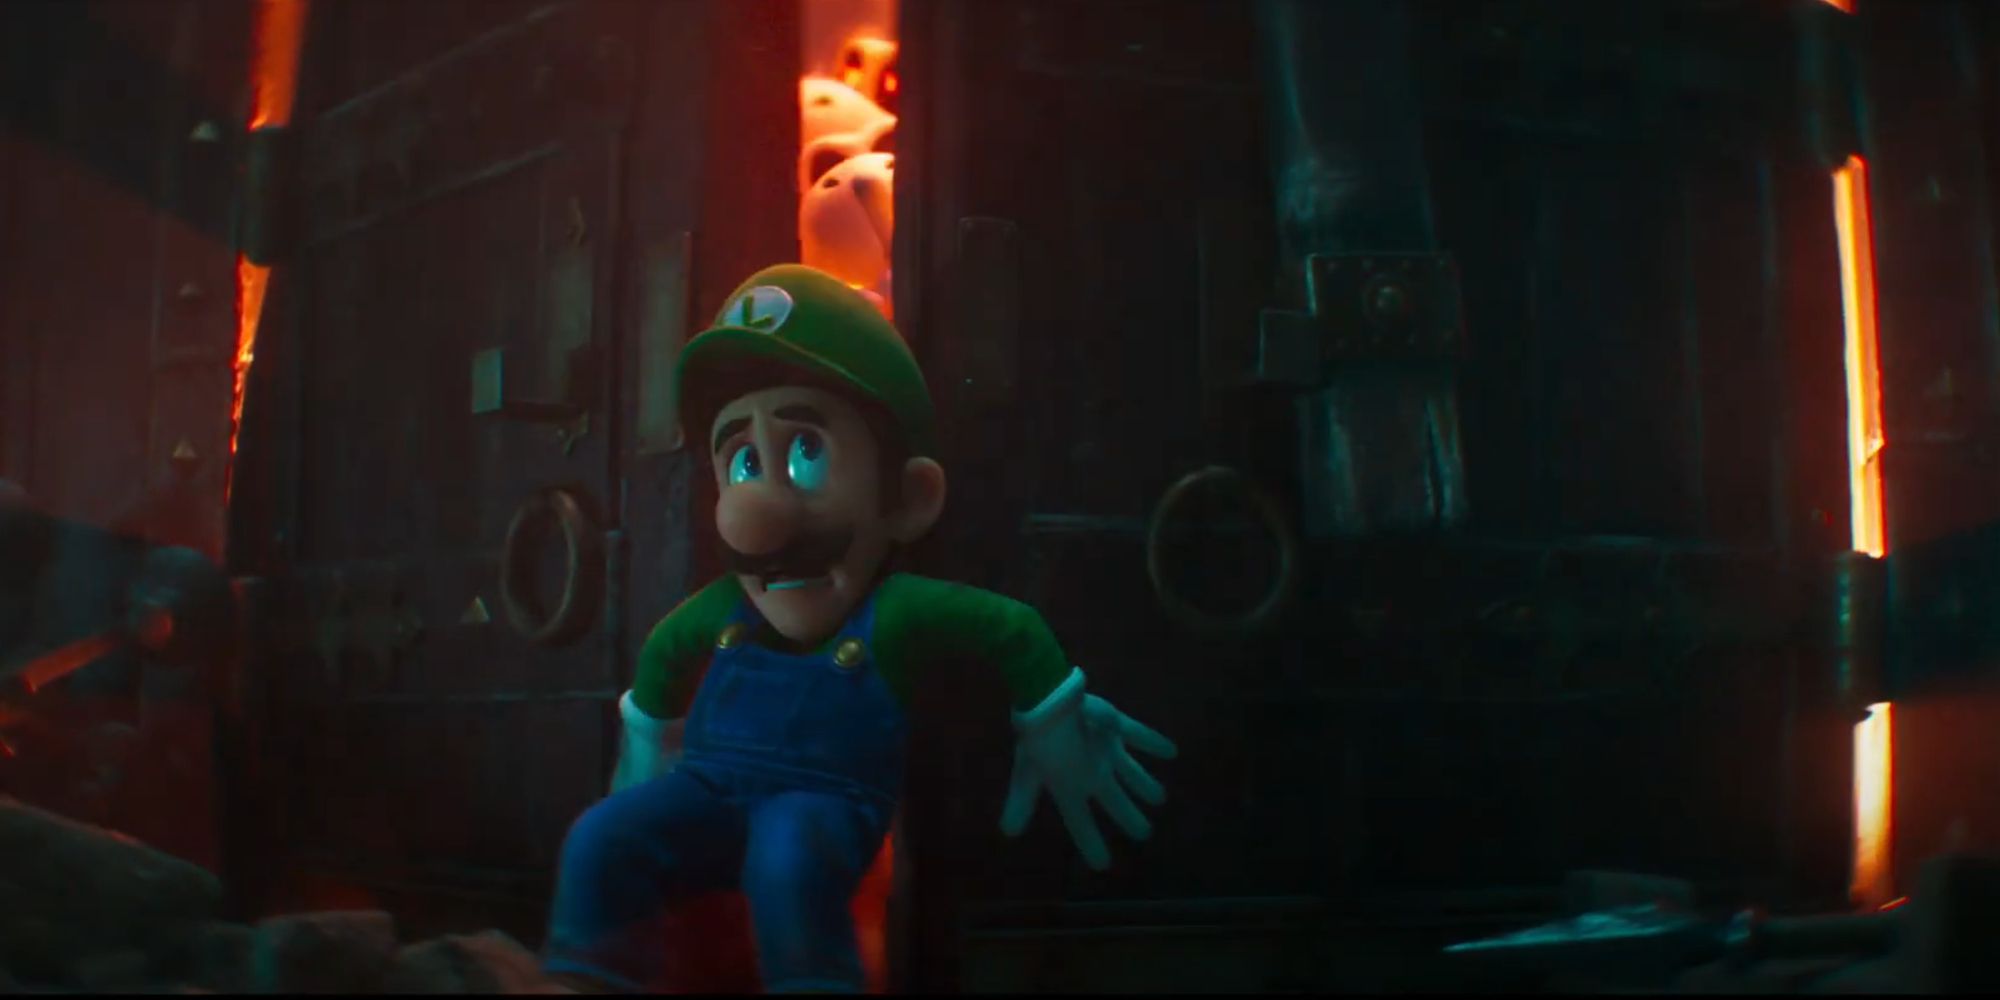 Charlie Day says he wants to star in a Luigi's Mansion spinoff